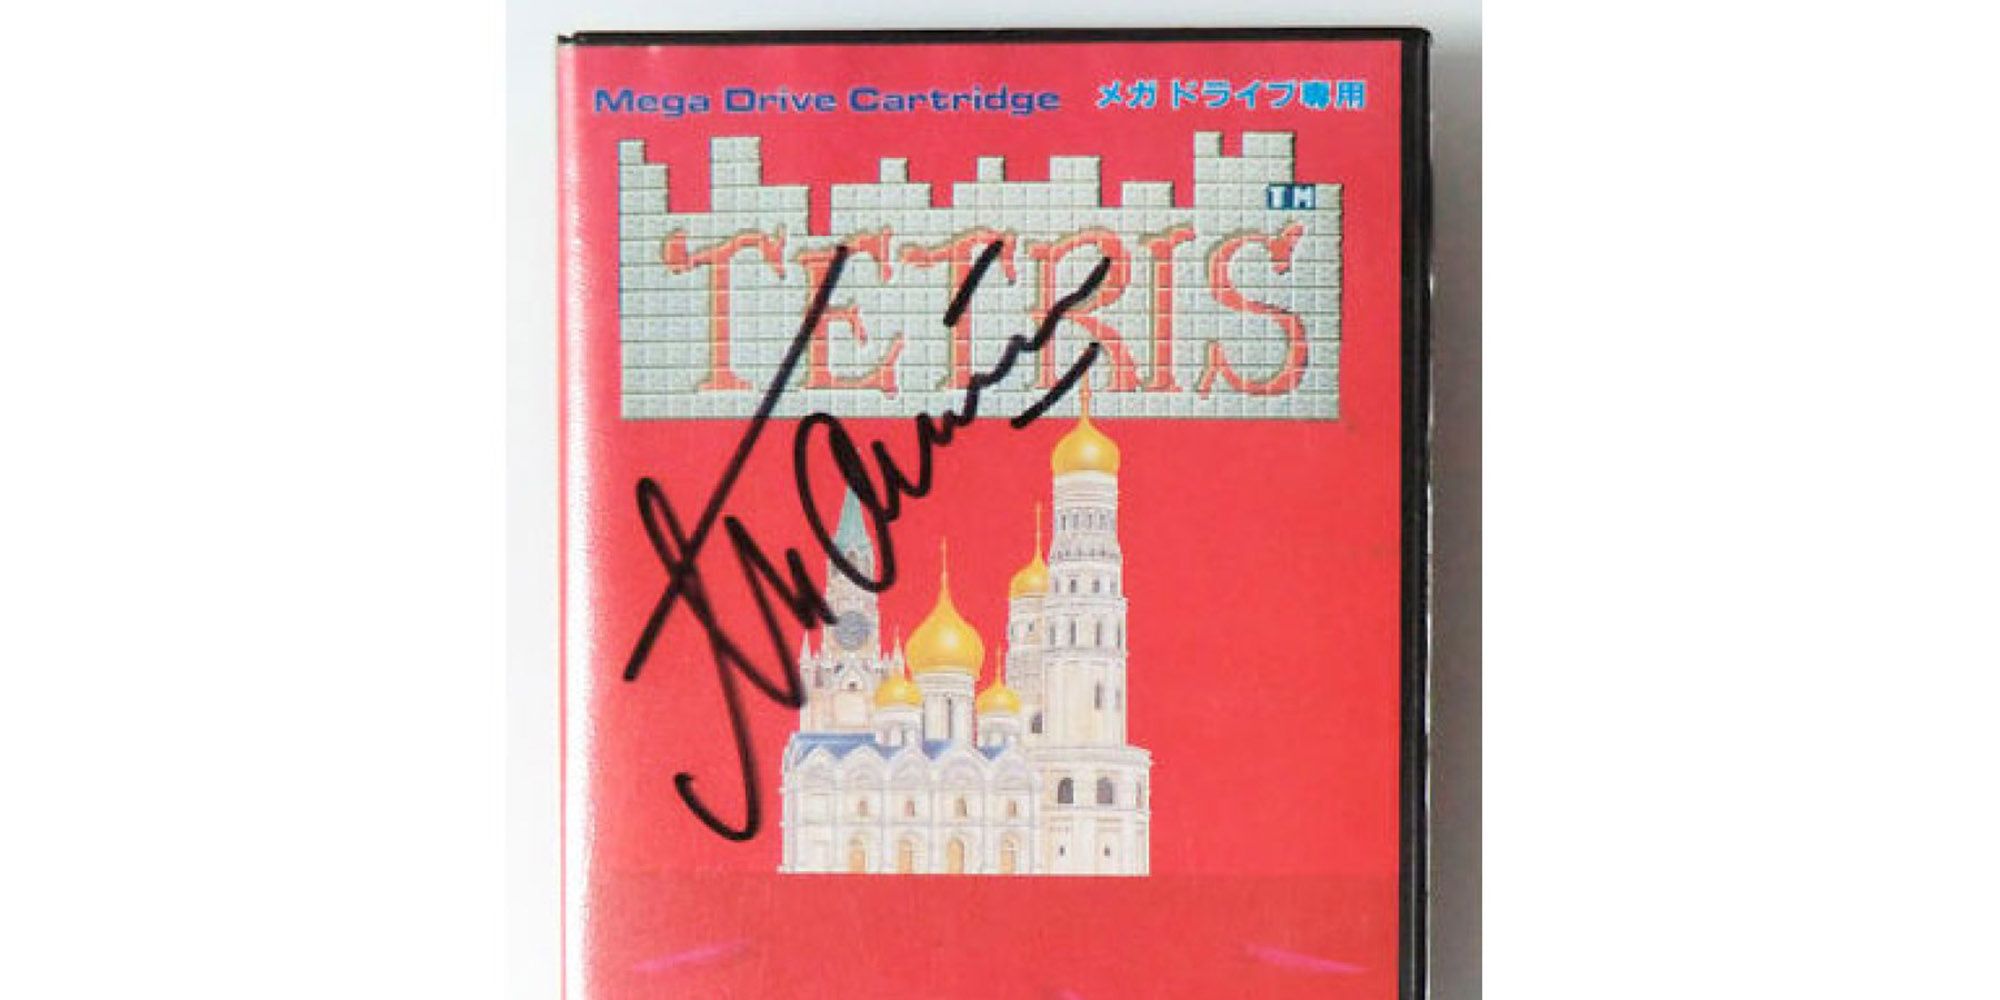 The only documented copy of Tetris for the Mega Drive